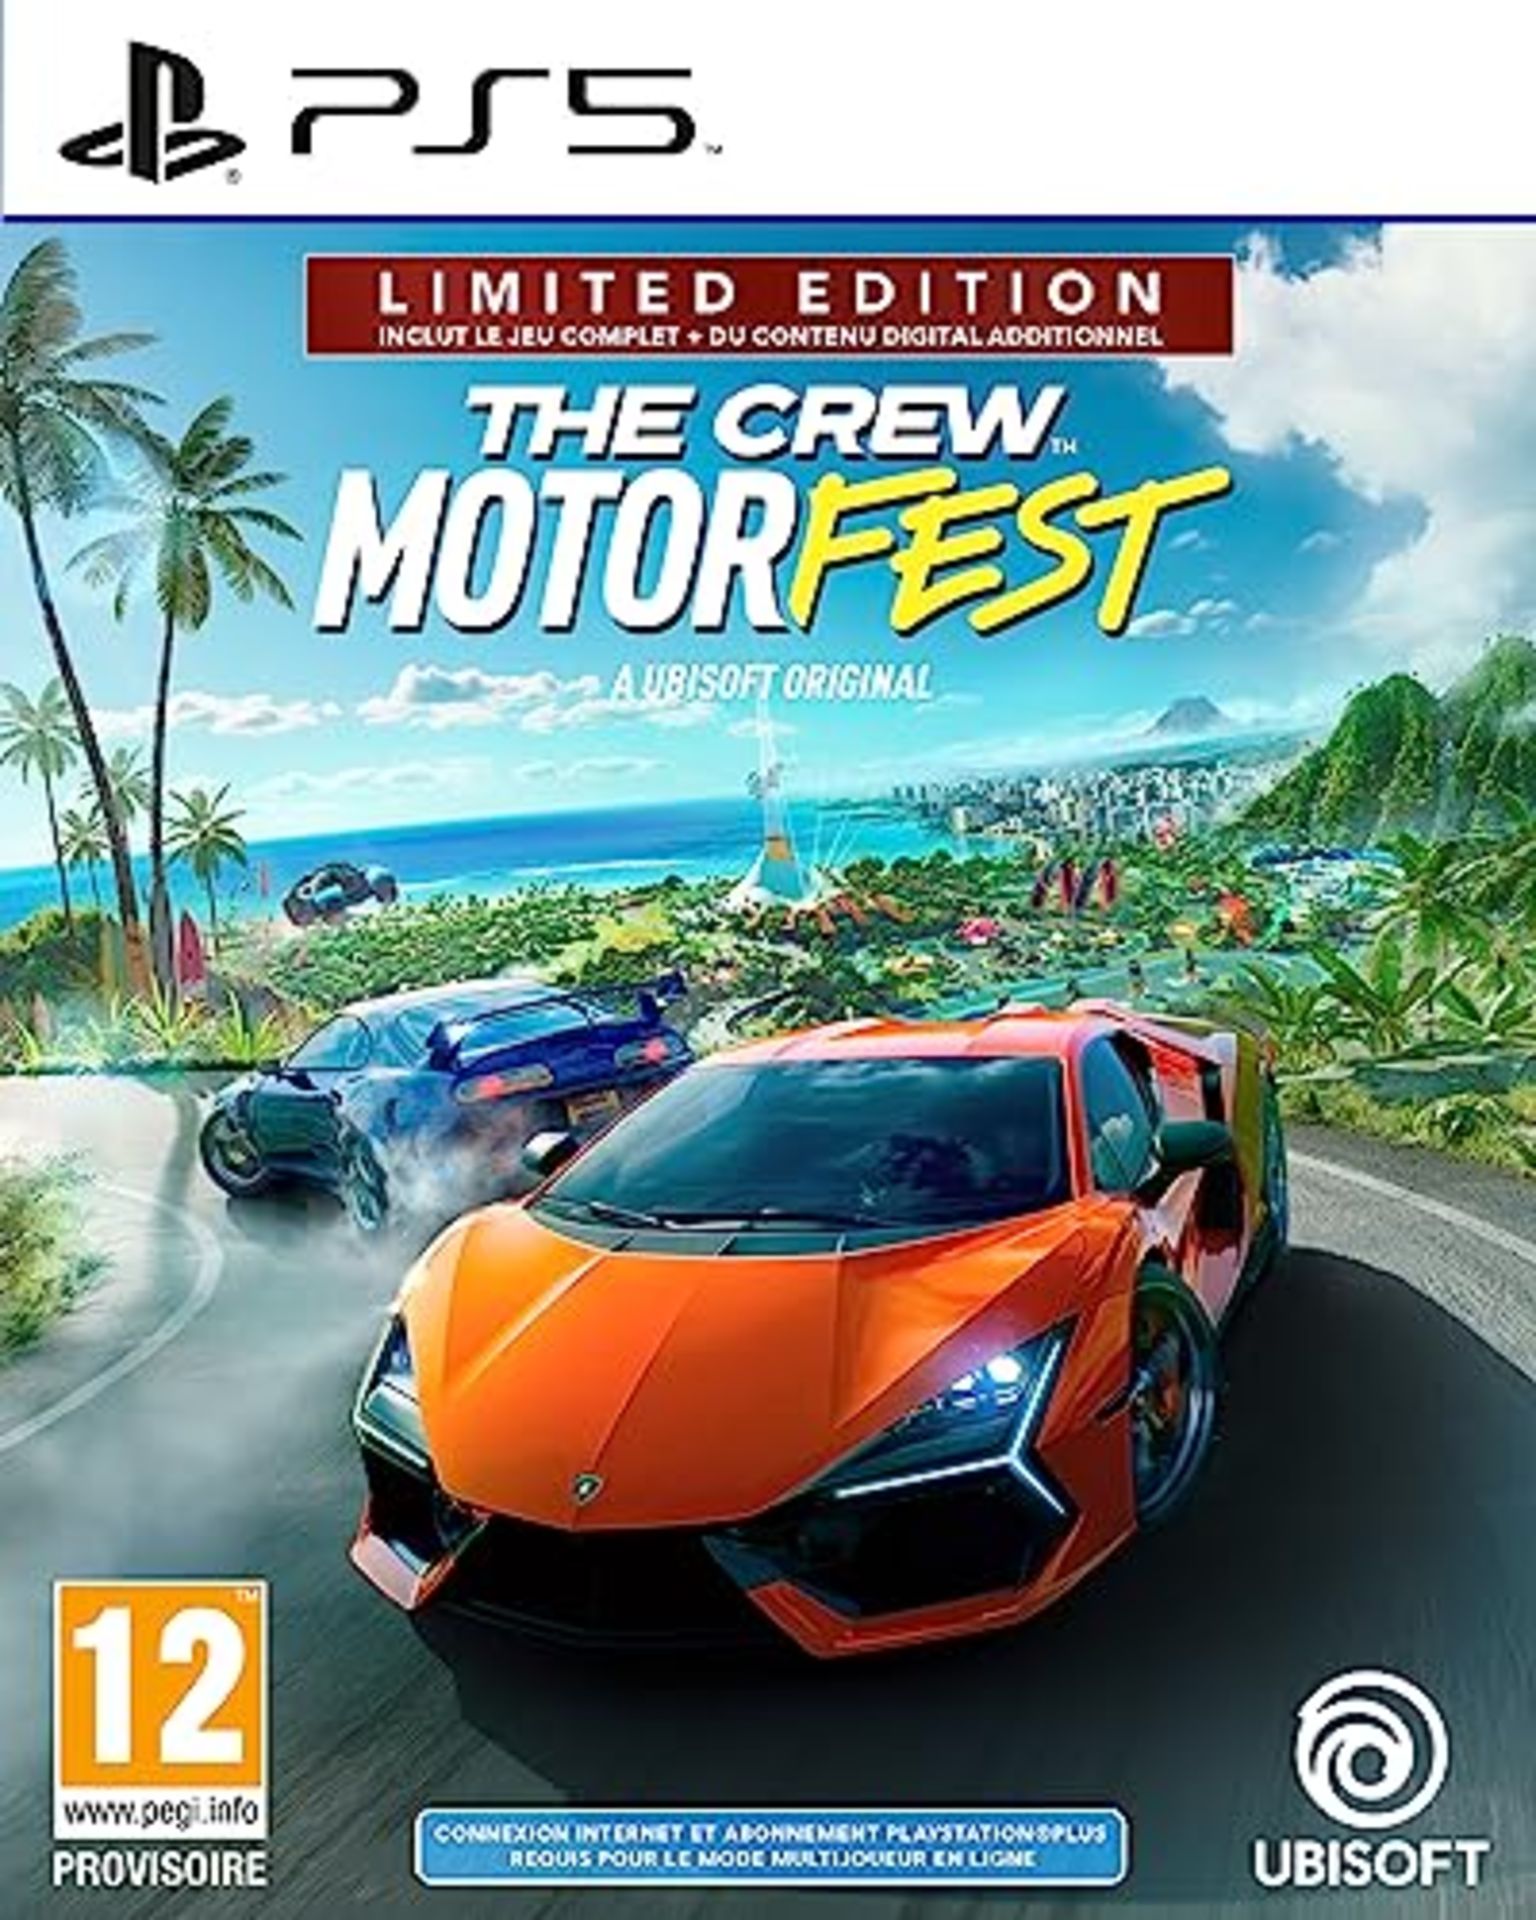 The Crew Motorfest Limited Edition for PS5